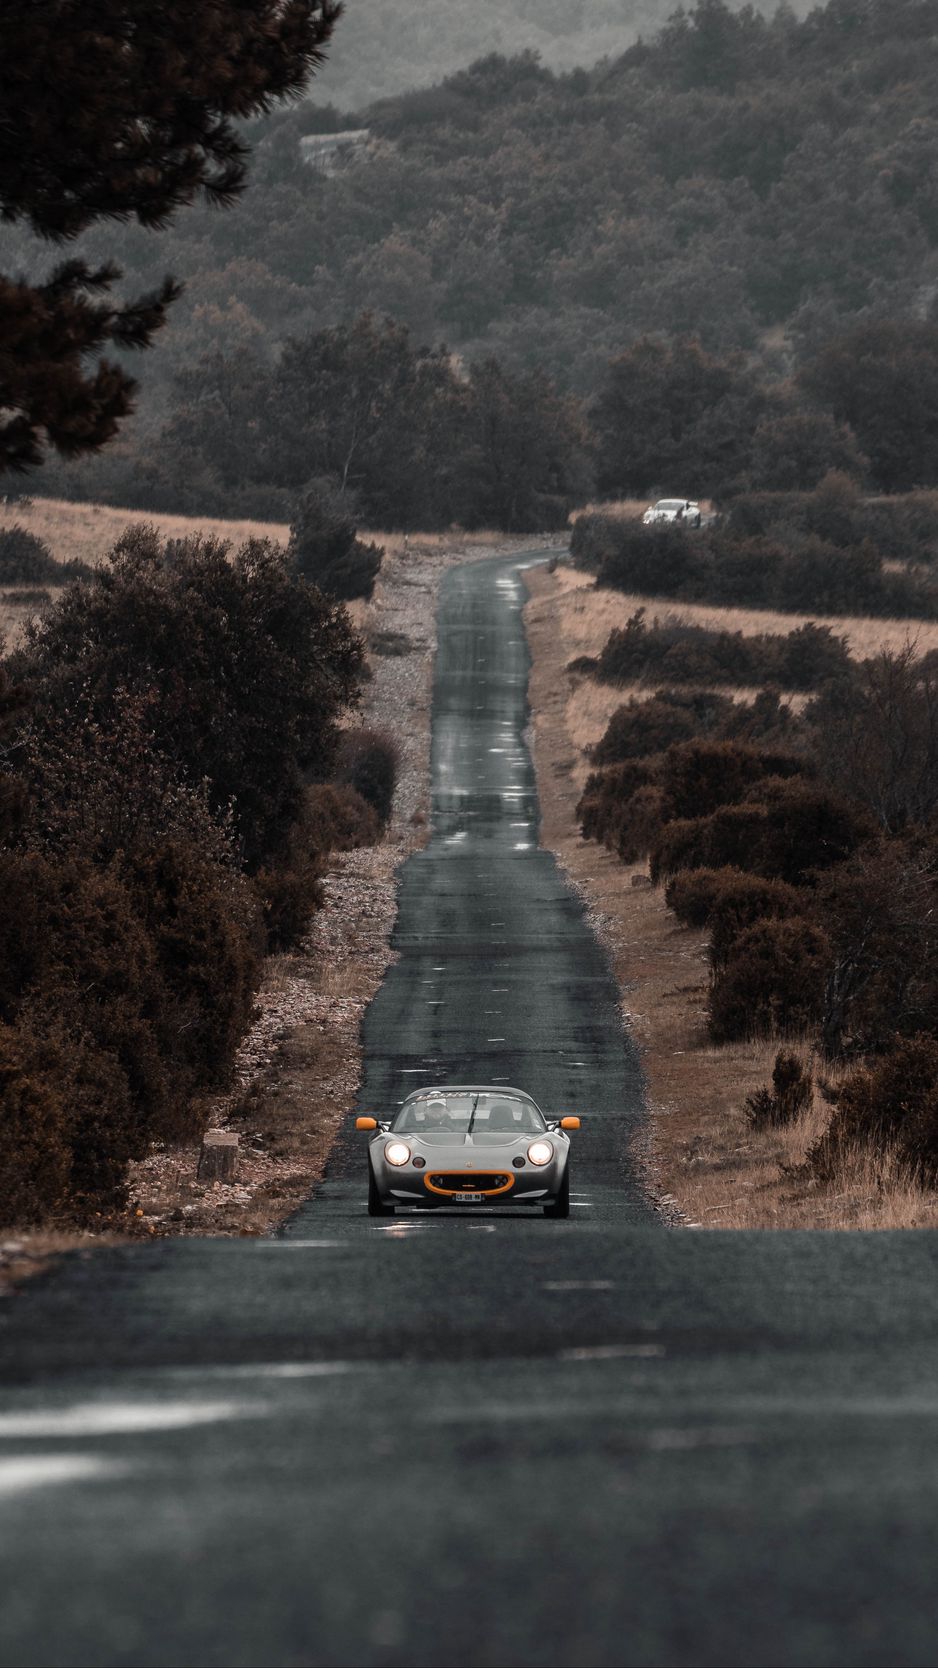 Download wallpaper 938x1668 lotus, car, sports car, black, road iphone  8/7/6s/6 for parallax hd background